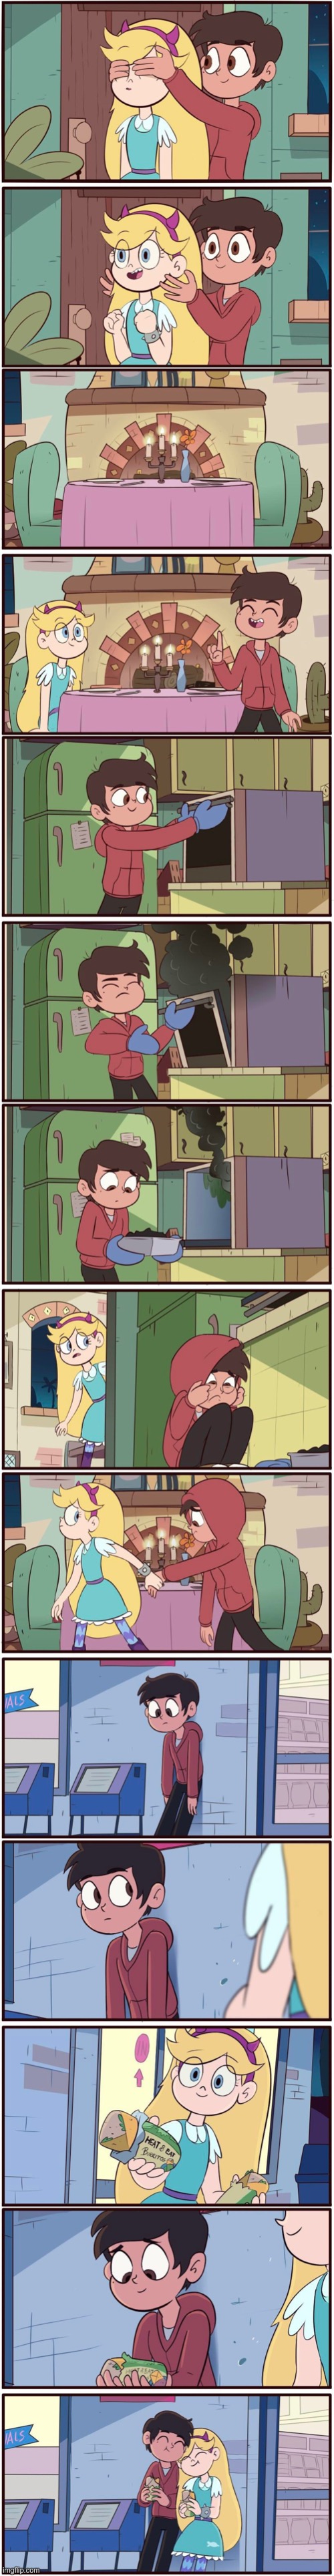 MorningMark - Eating Out | image tagged in comics,morningmark,svtfoe,star vs the forces of evil,memes,stop reading the tags | made w/ Imgflip meme maker